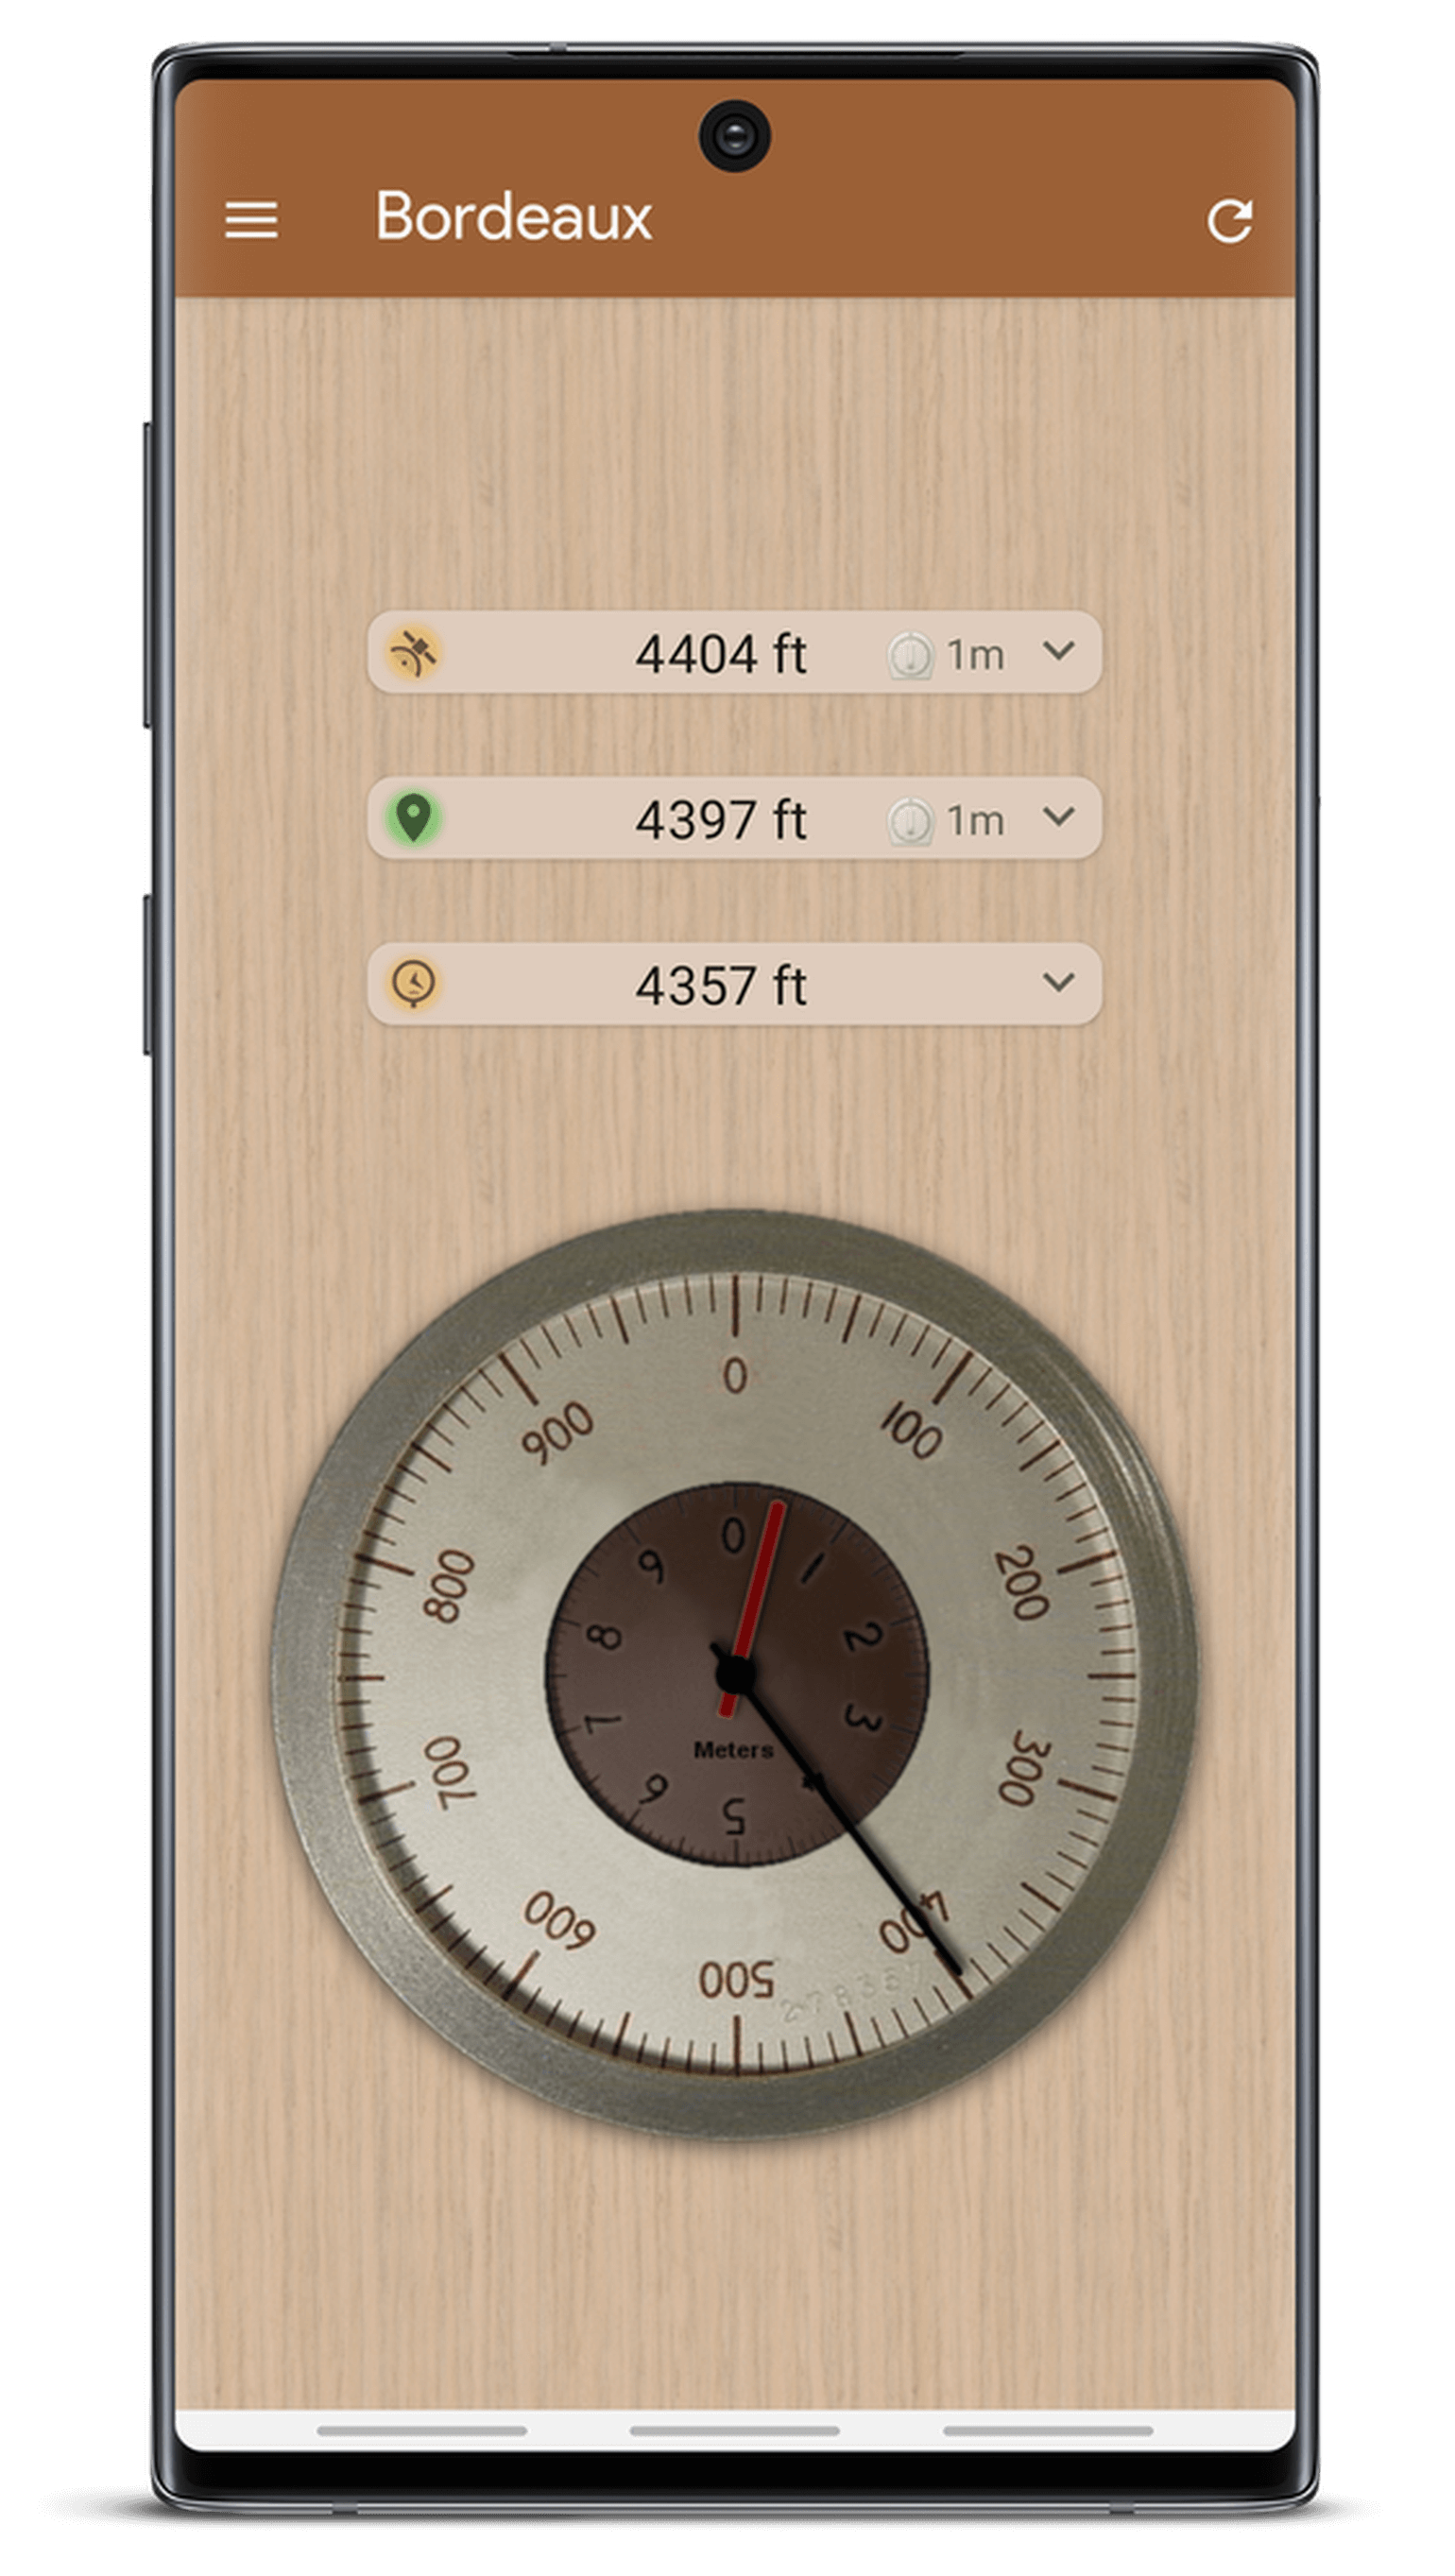 Accurate Altimeter PRO v2.2.22 [Patched] 8085547707f650a9160cc8672b1c6bc0